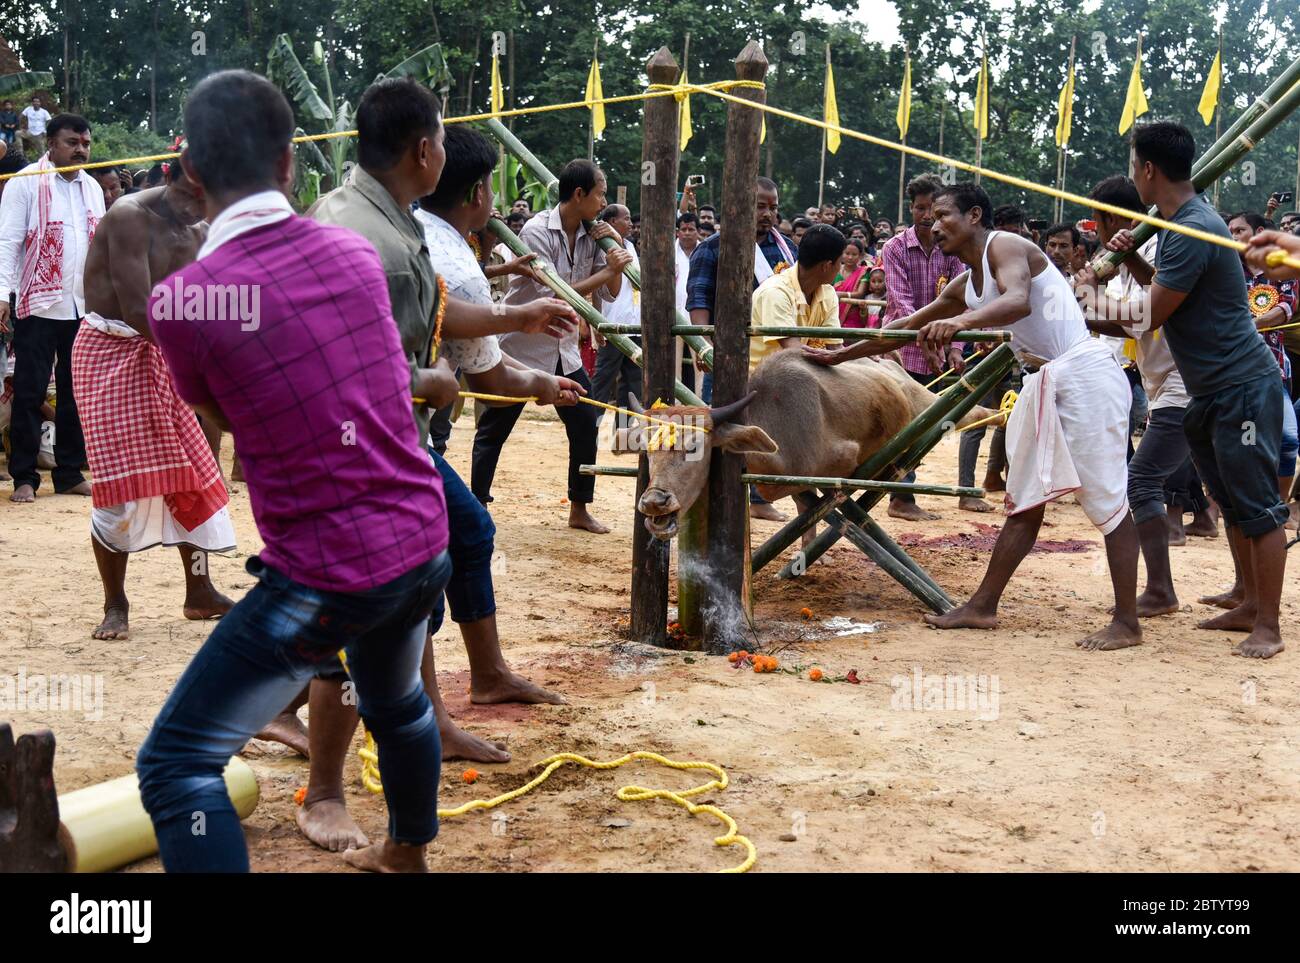 INDIA: A buffalo is wedged into a rudimentary scaffold. GRUESOME photos show ruthless crowds baying for blood as buffalos are brutally slaughtered in Stock Photo